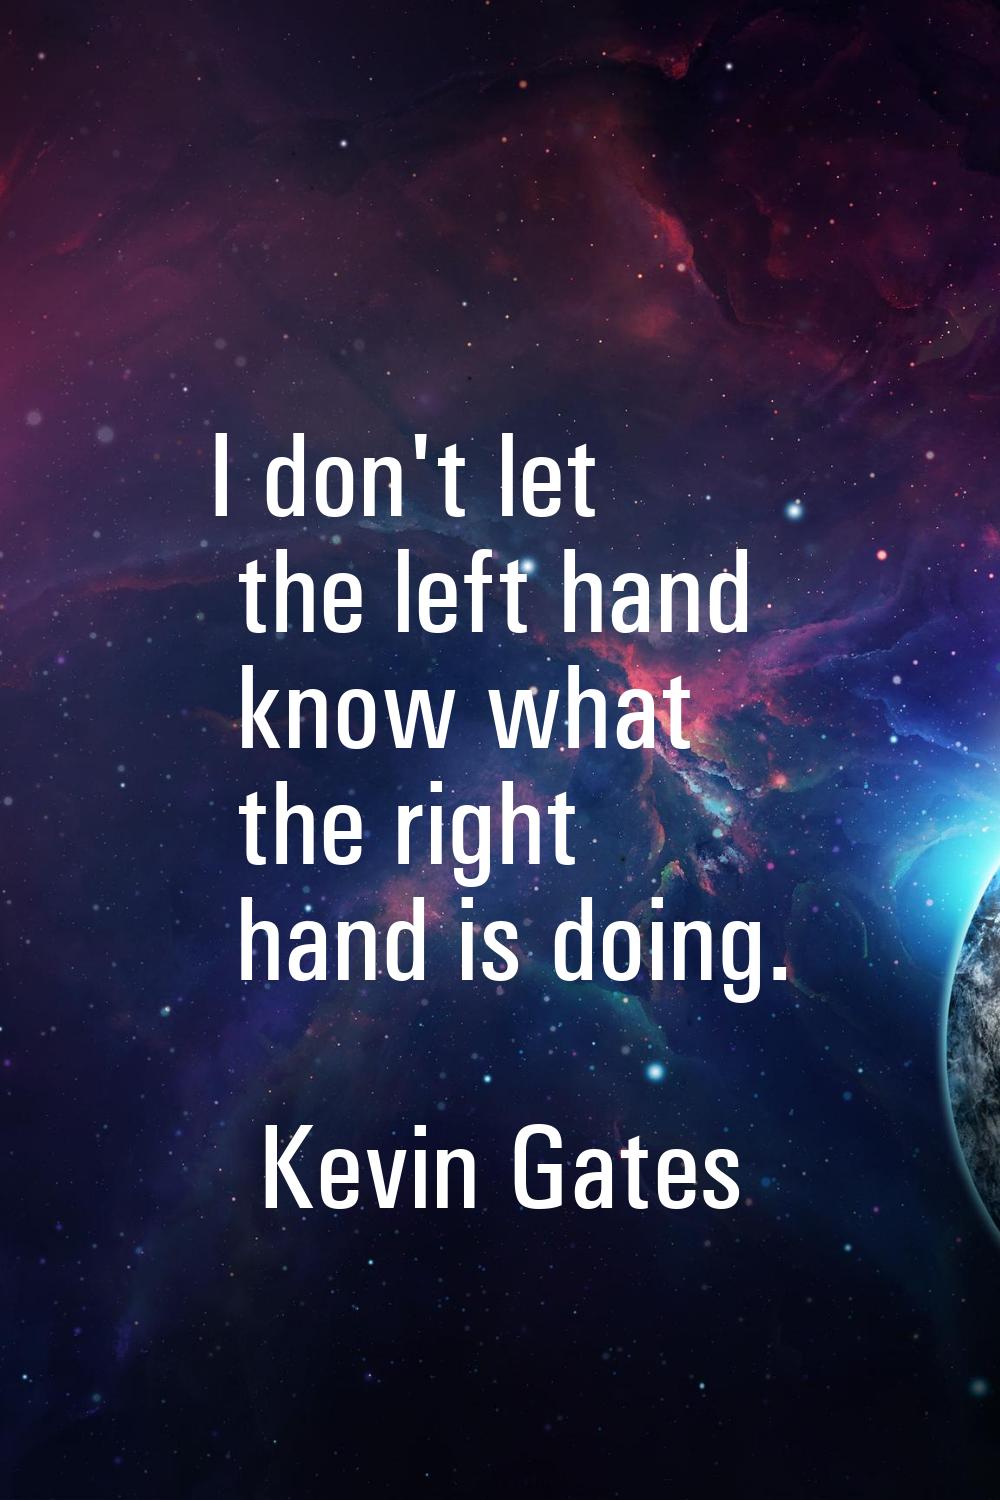 I don't let the left hand know what the right hand is doing.